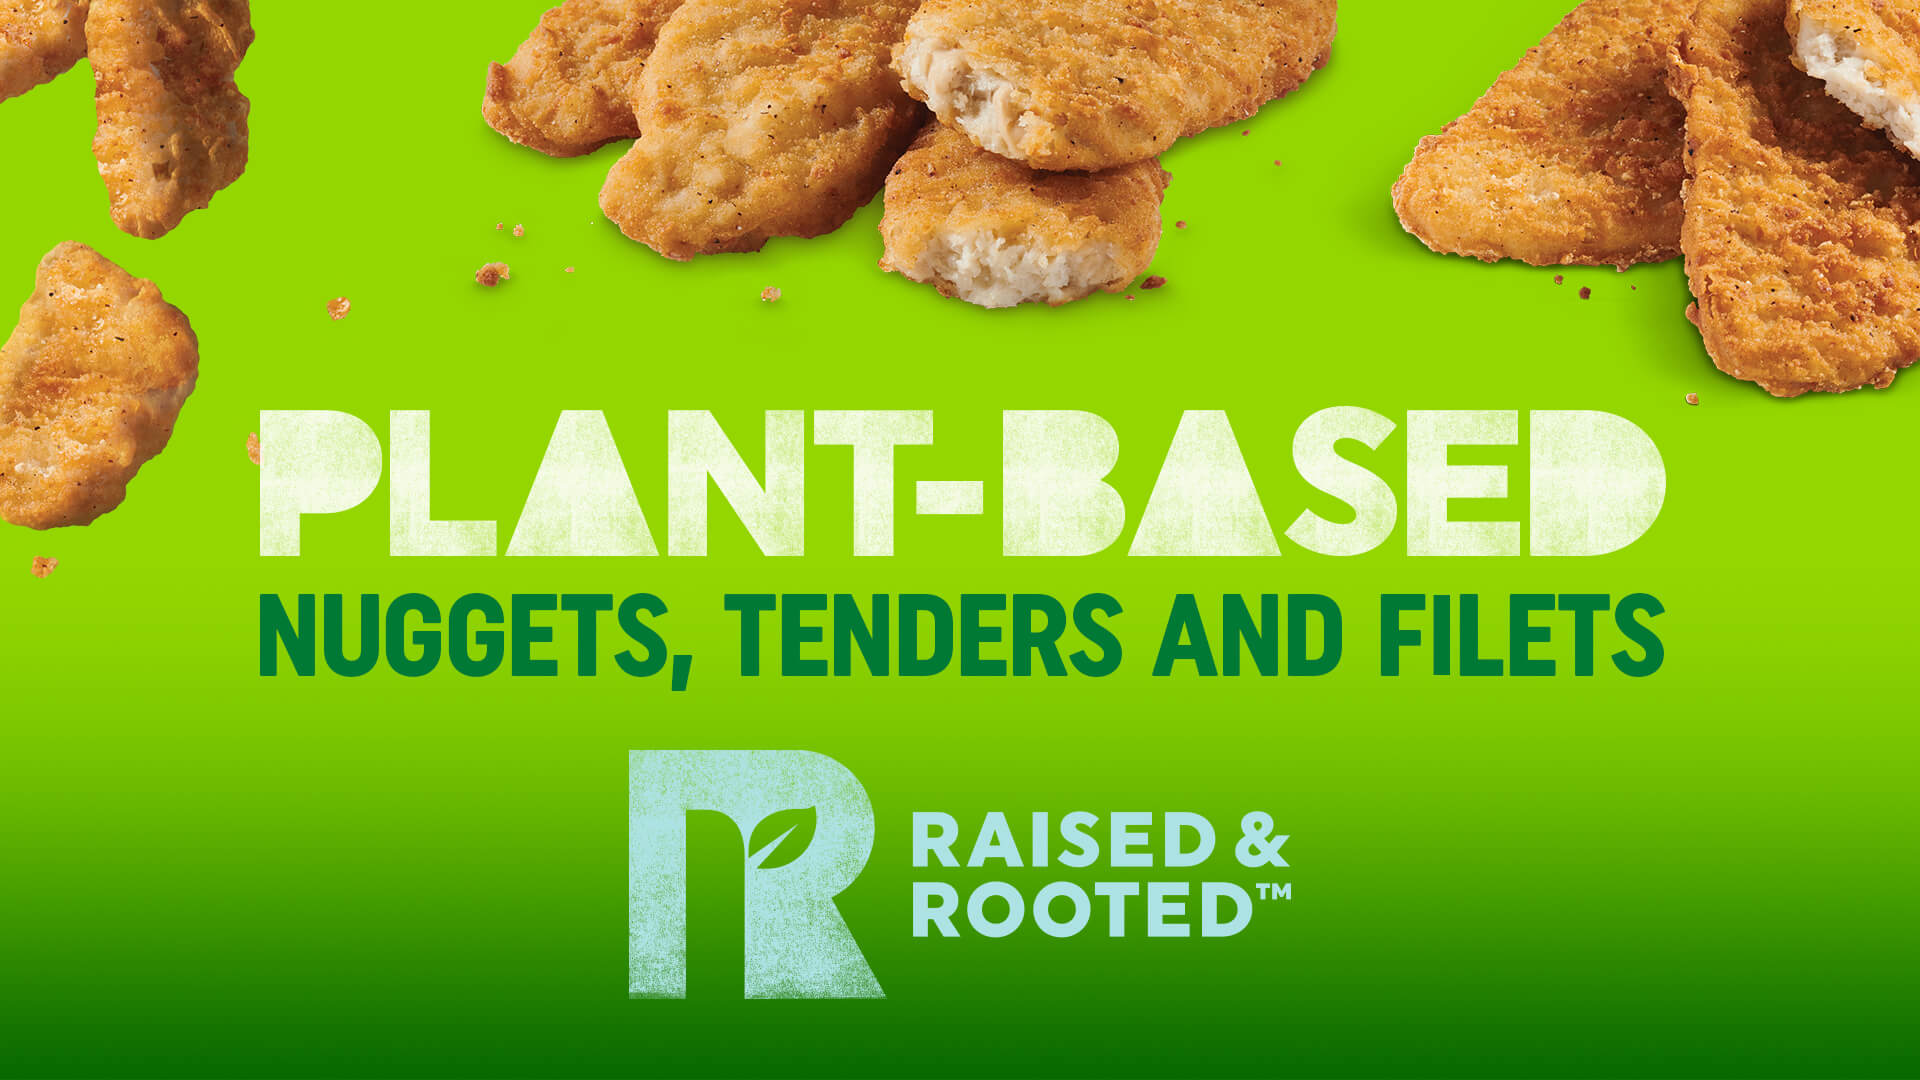 Plant-Based Nuggets, Tenders And Filets: Raised & Rooted